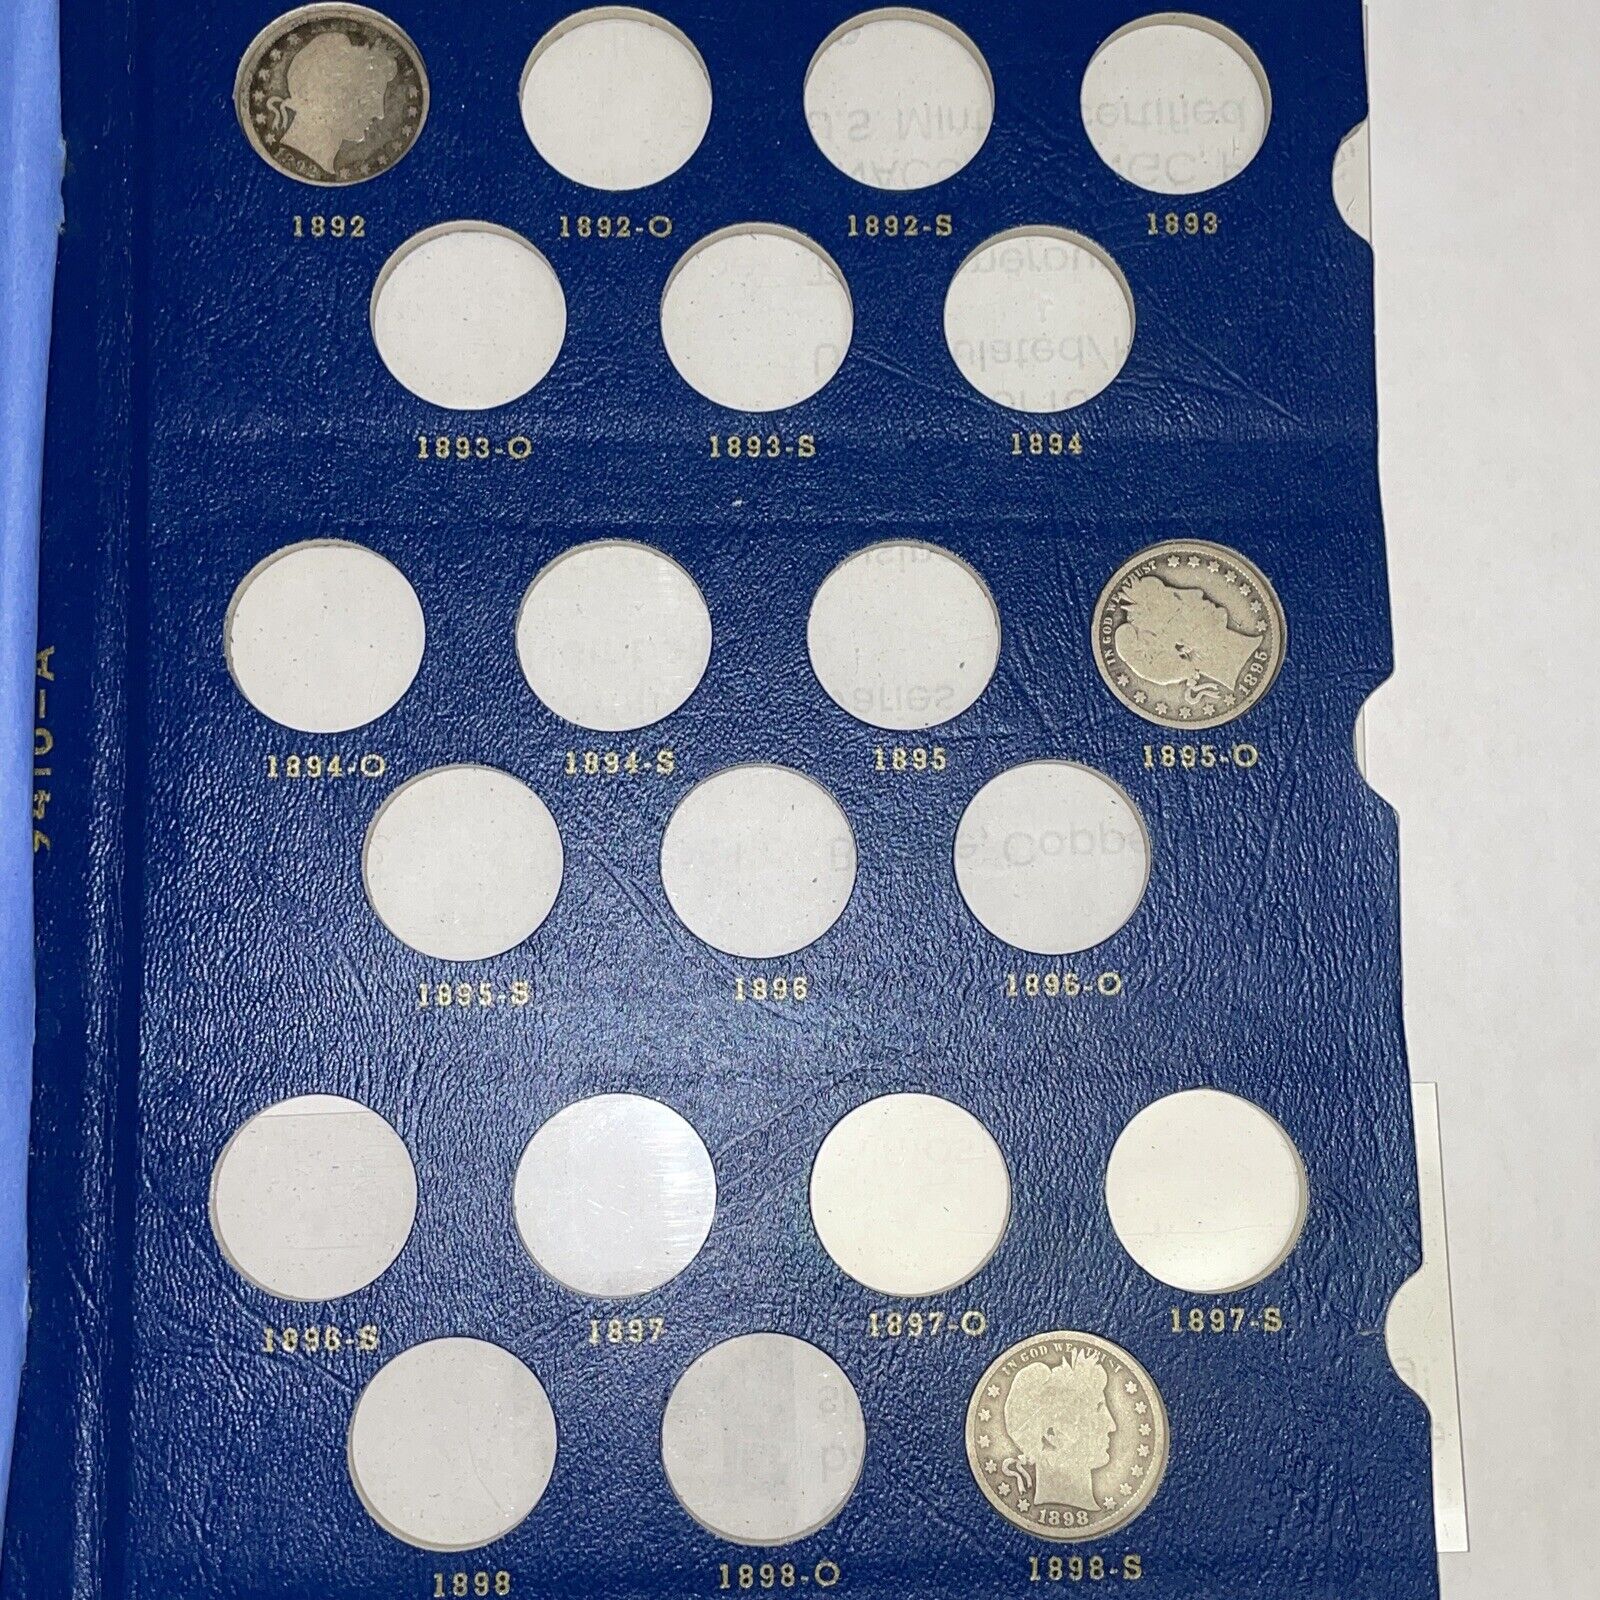 Mary’s 14 pc Barber Album for collectibles with coins note/front of album peeled